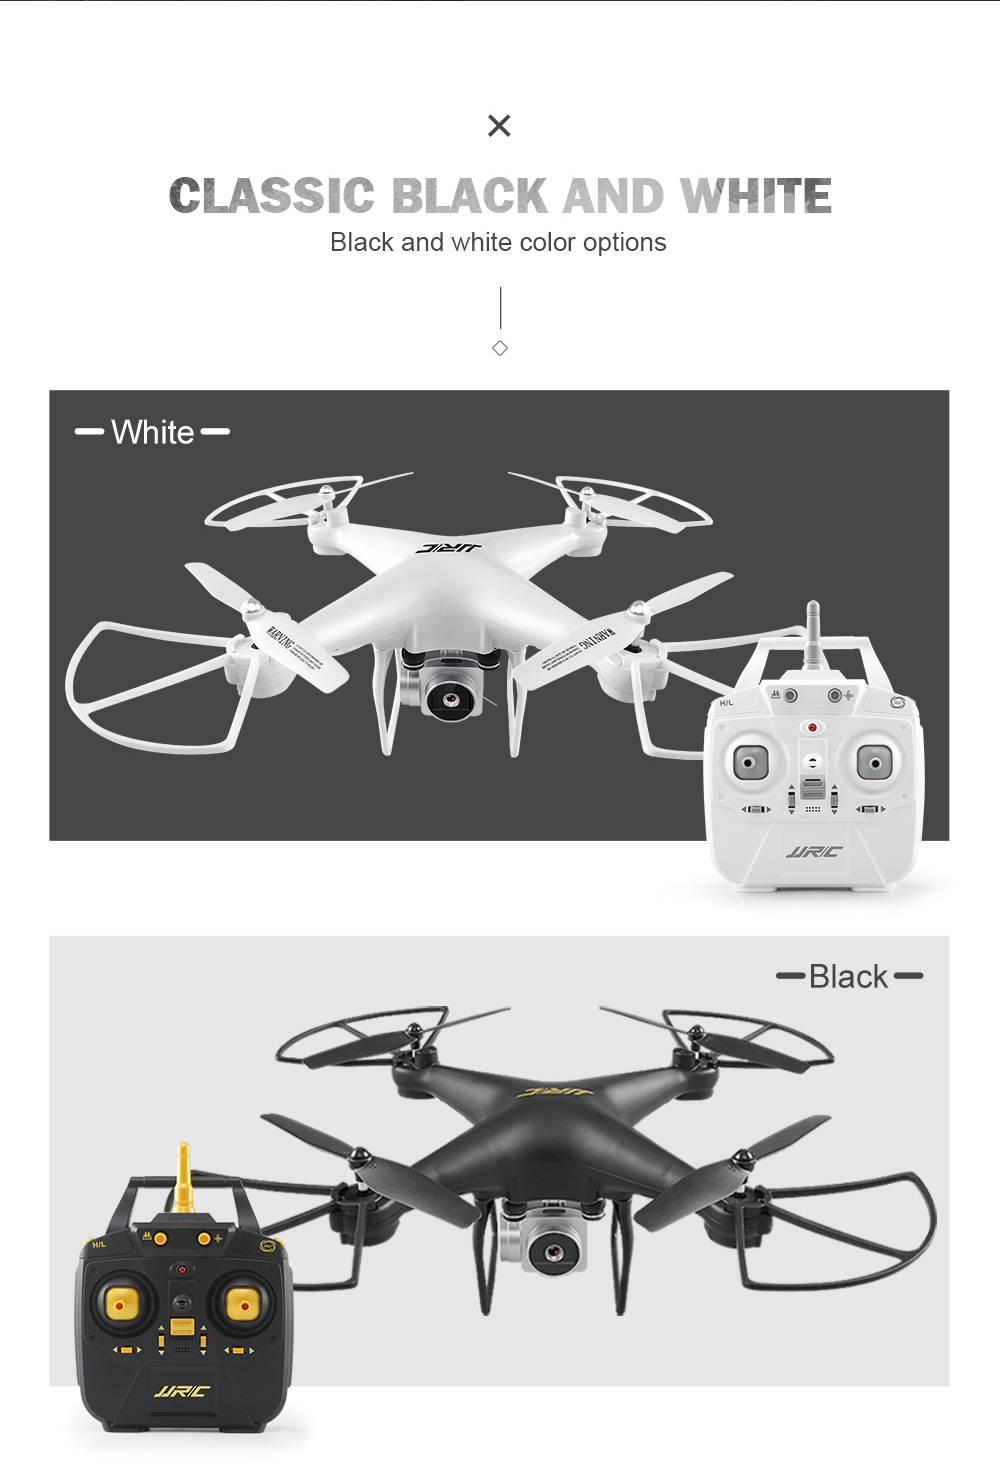 GeekbuyingJJRC H68 BELLWETHER WiFi FPV RC Quadcopter Max Flight Time 20mins with 720P HD Camera Altitude Hold Mode RTF - White